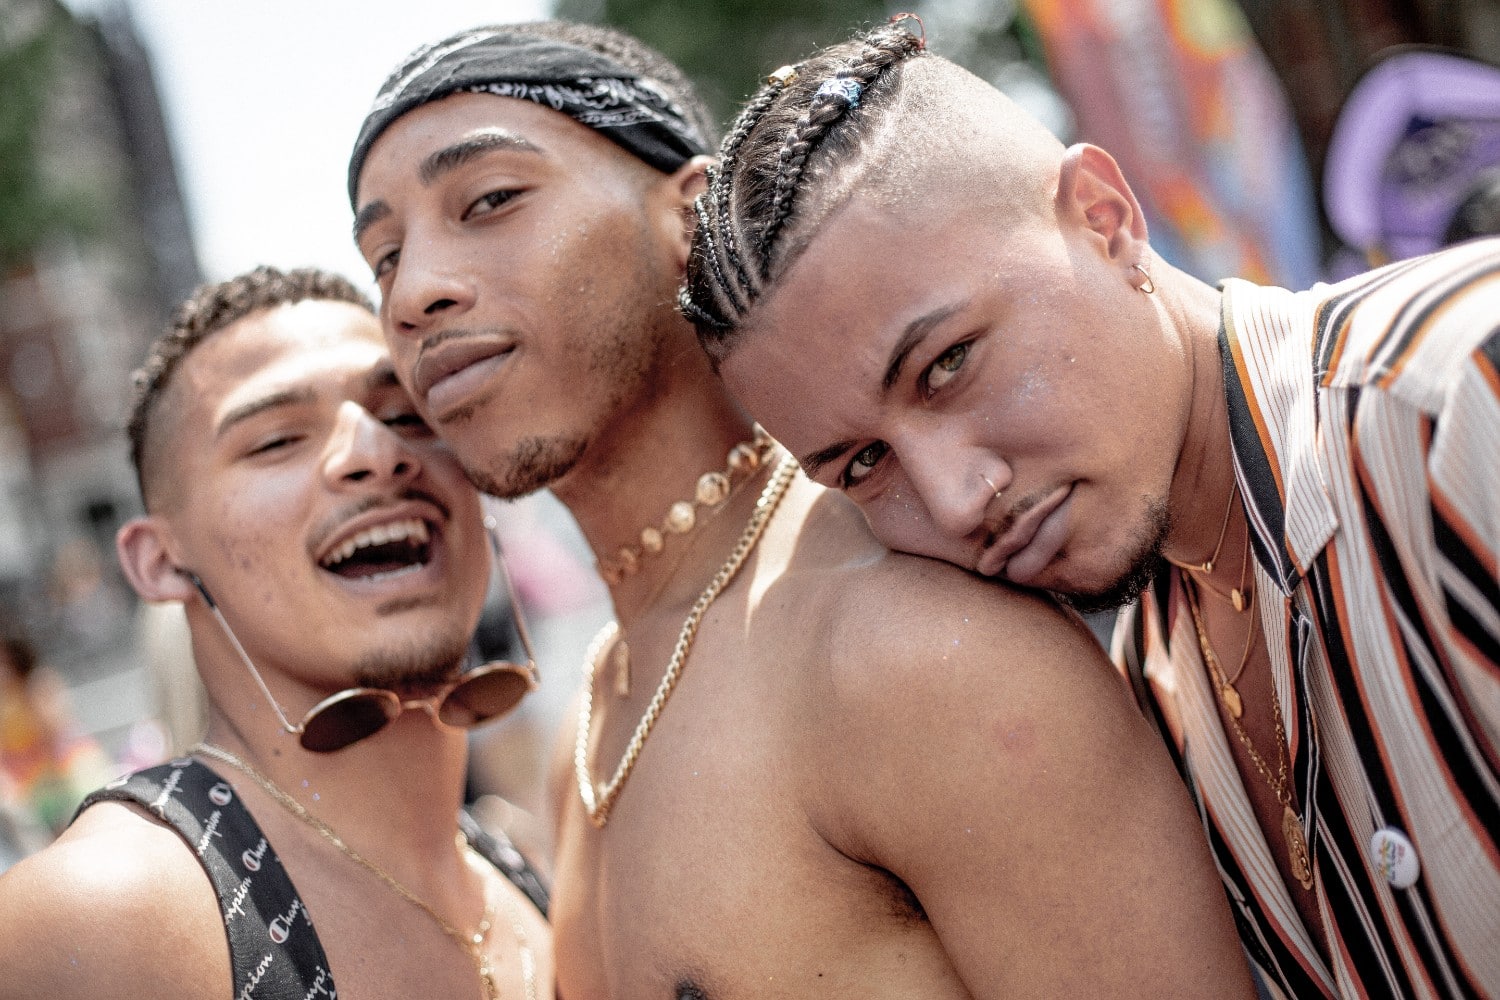 Why So Many Black Kids Are “Turning Gay” — An Explanation